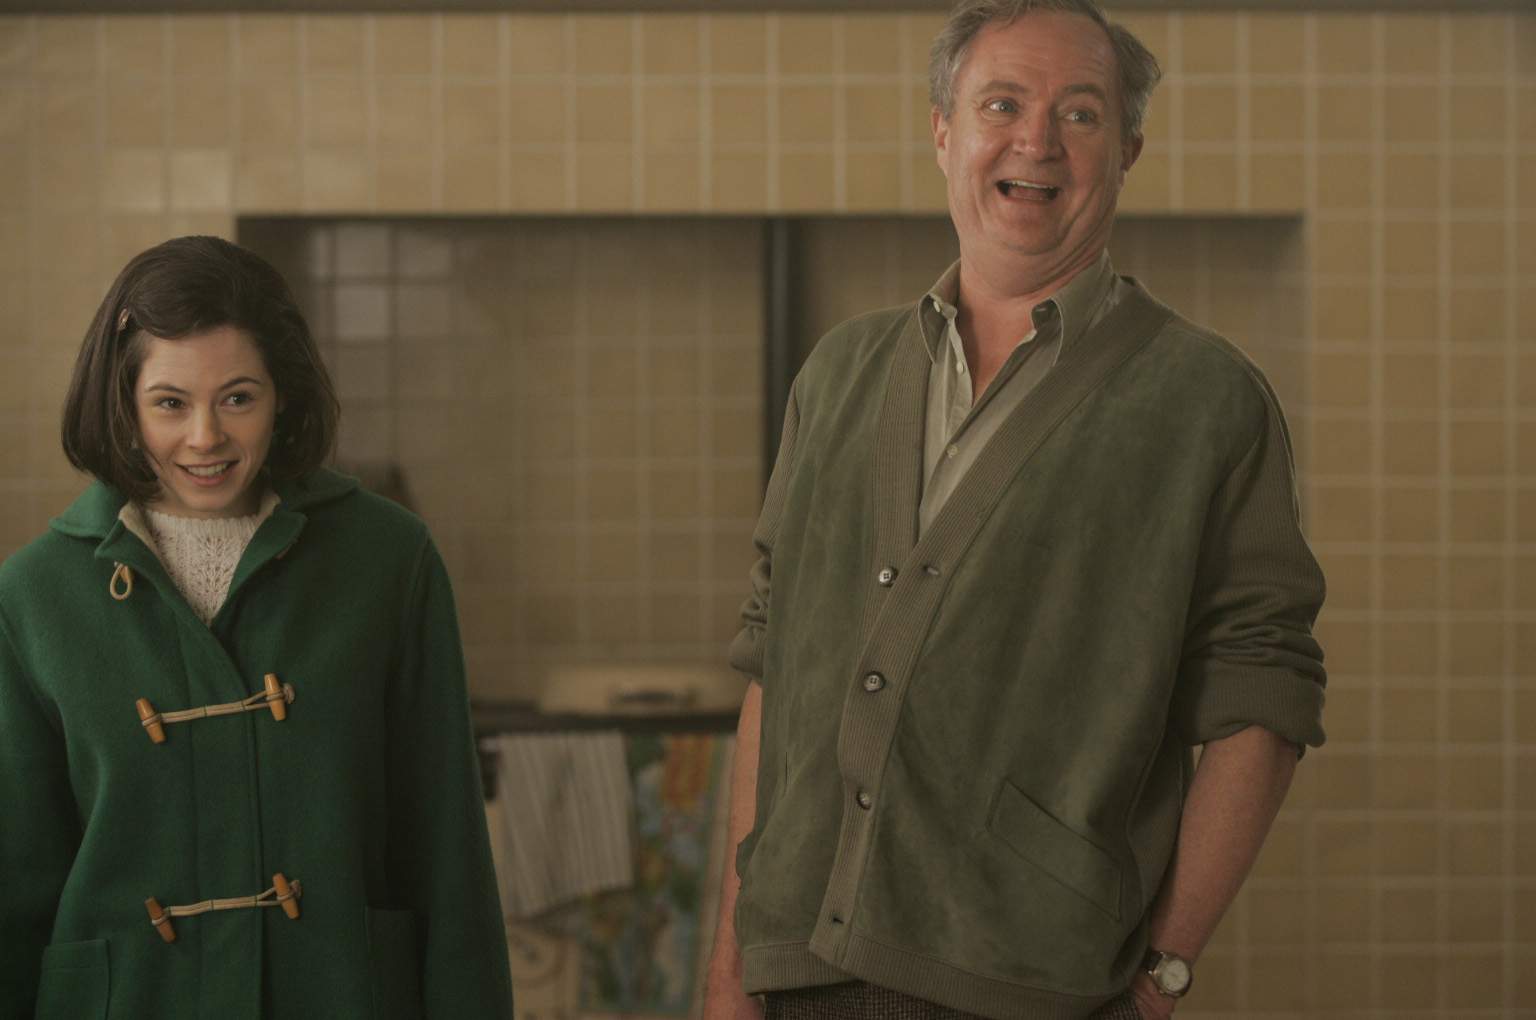 Elaine Cassidy as Sandra and Jim Broadbent as Arthur Morrison in Sony Pictures Classics' When Did You Last See Your Father? (2007).